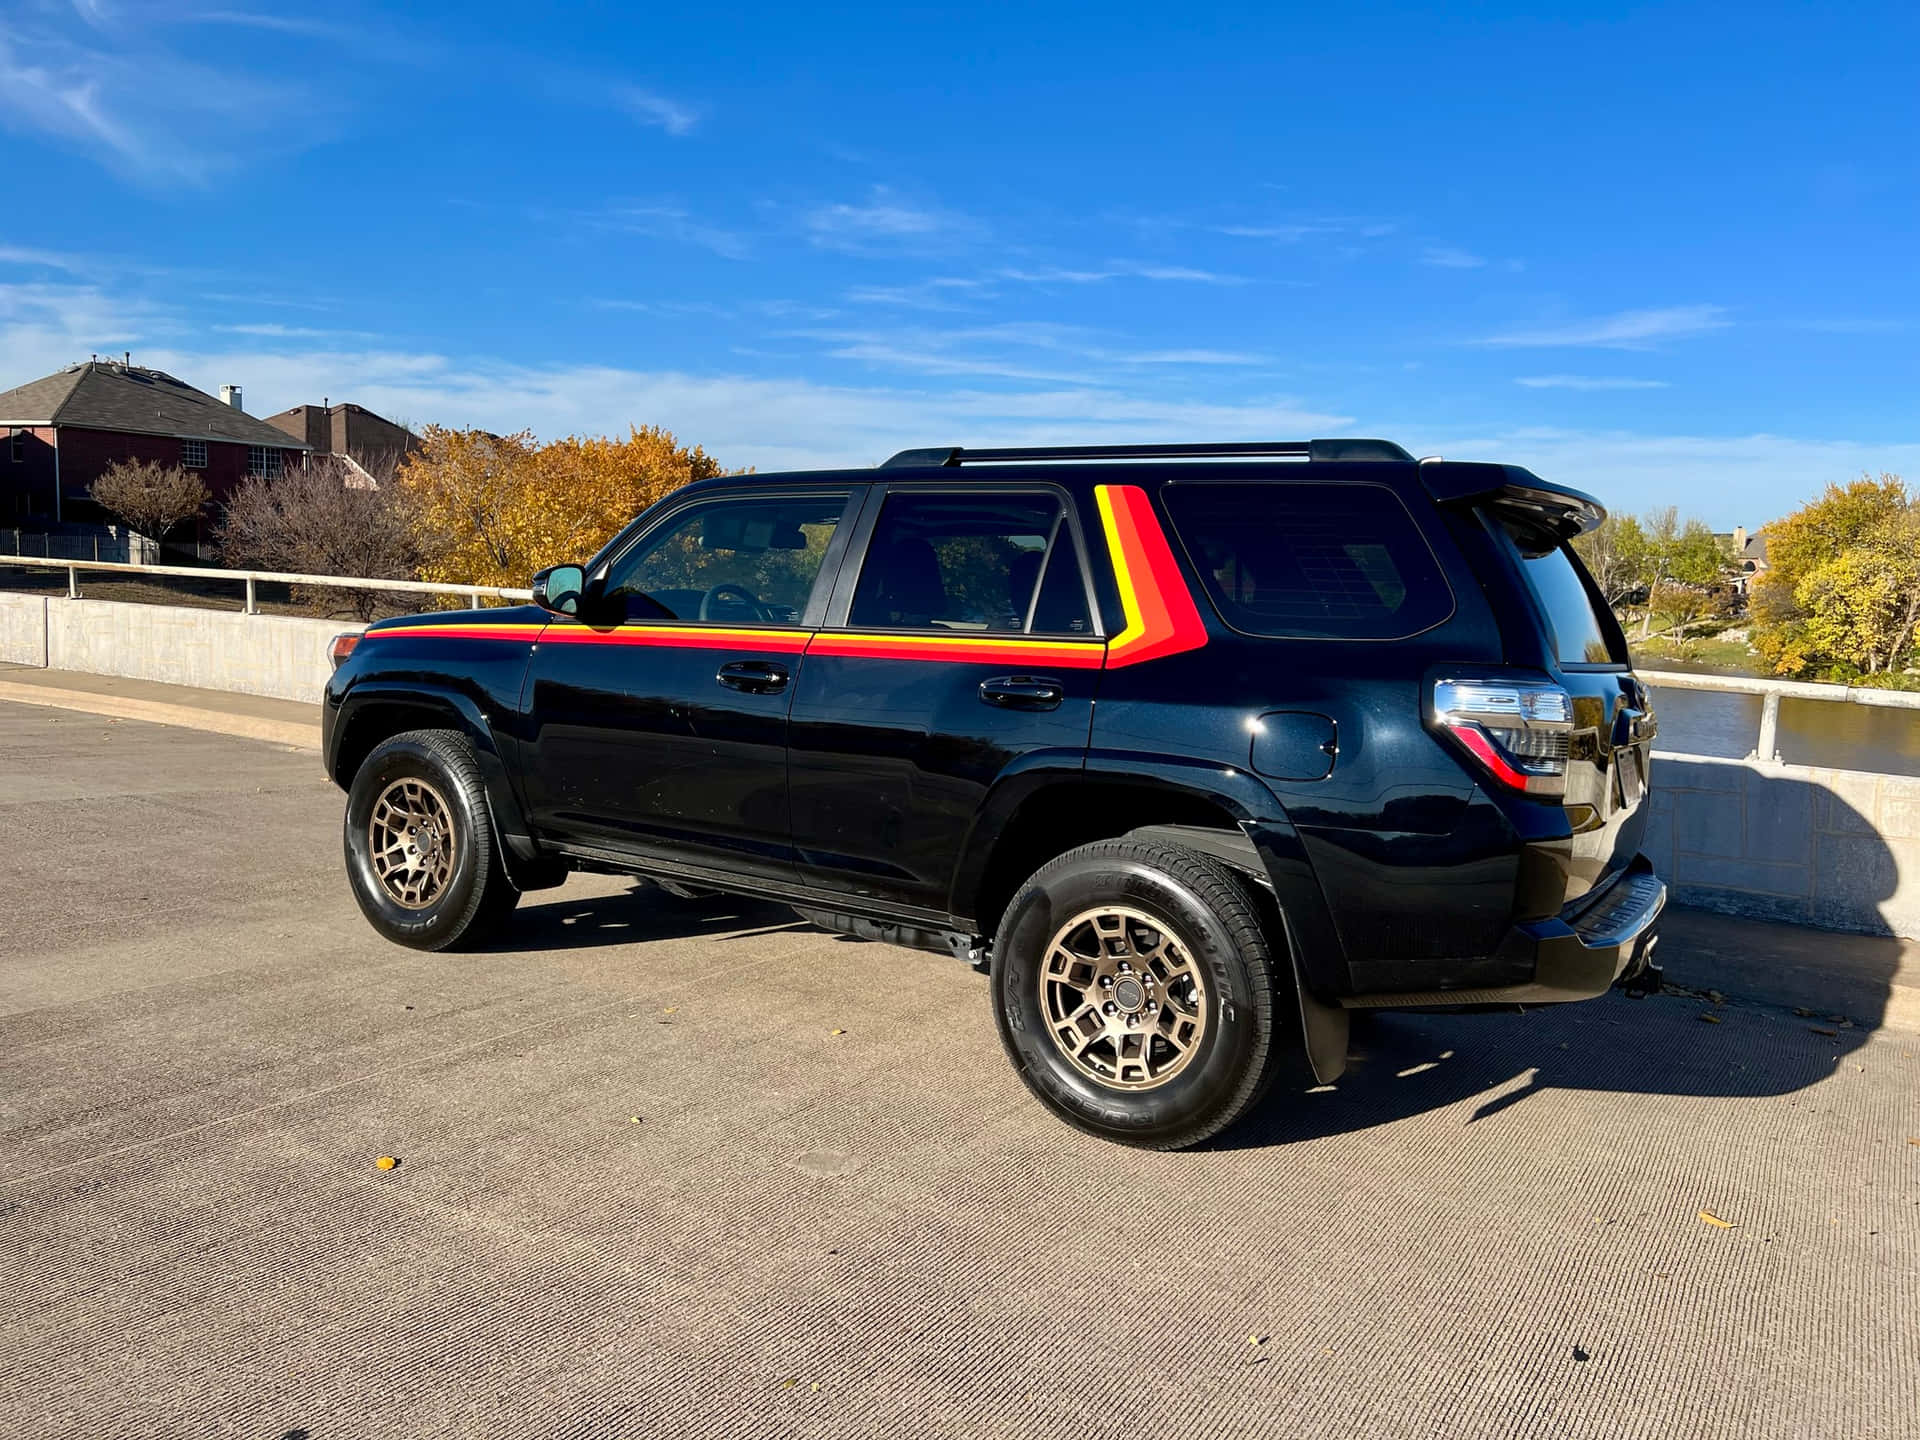 A Black Toyota 4runner With A Rainbow Stripe On The Side